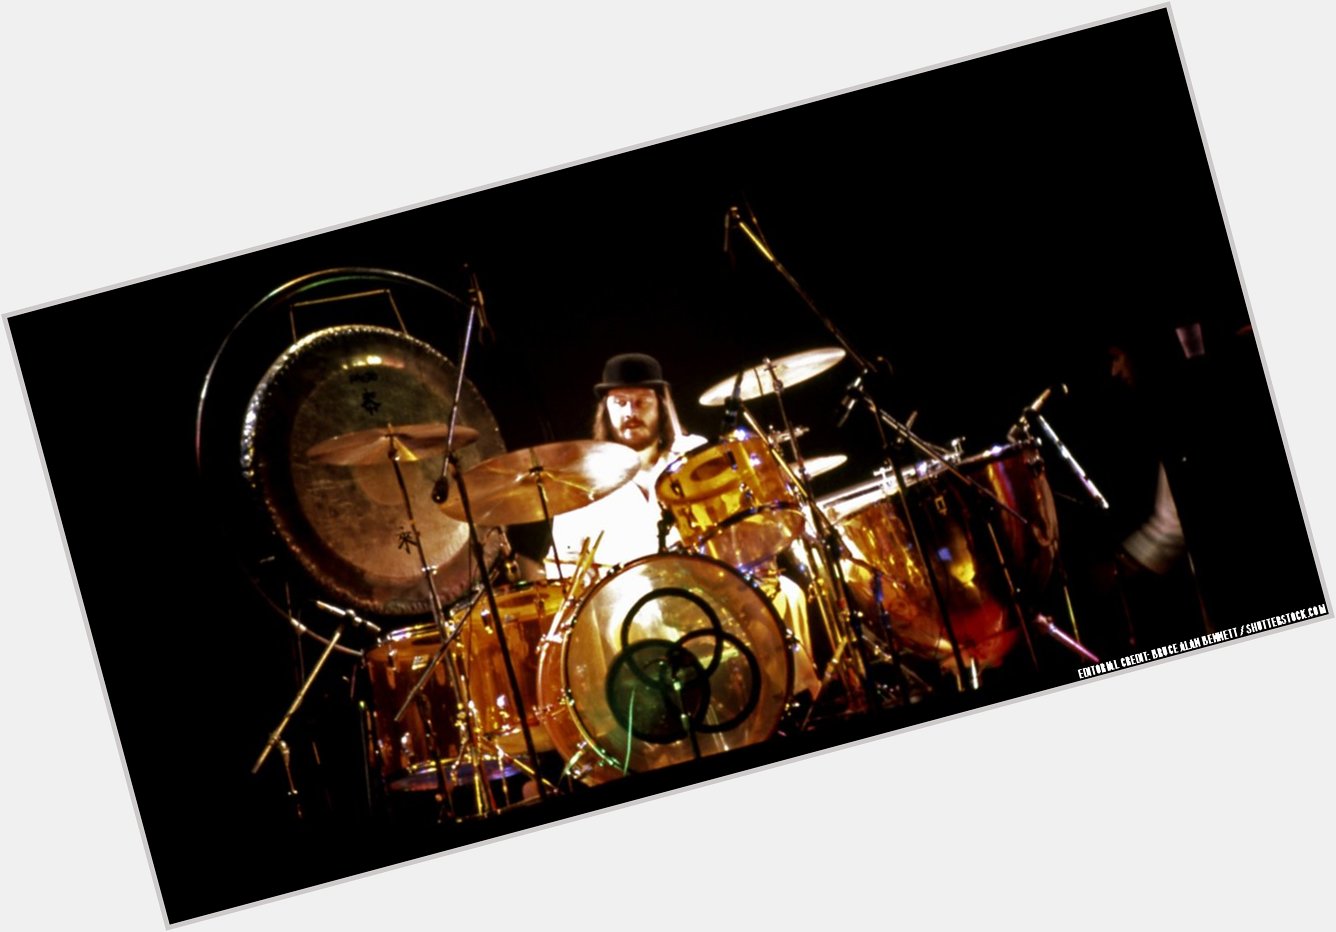 Happy birthday to one of the most influential rock drummers of all time, John Bonham, who would\ve been 71 today. 